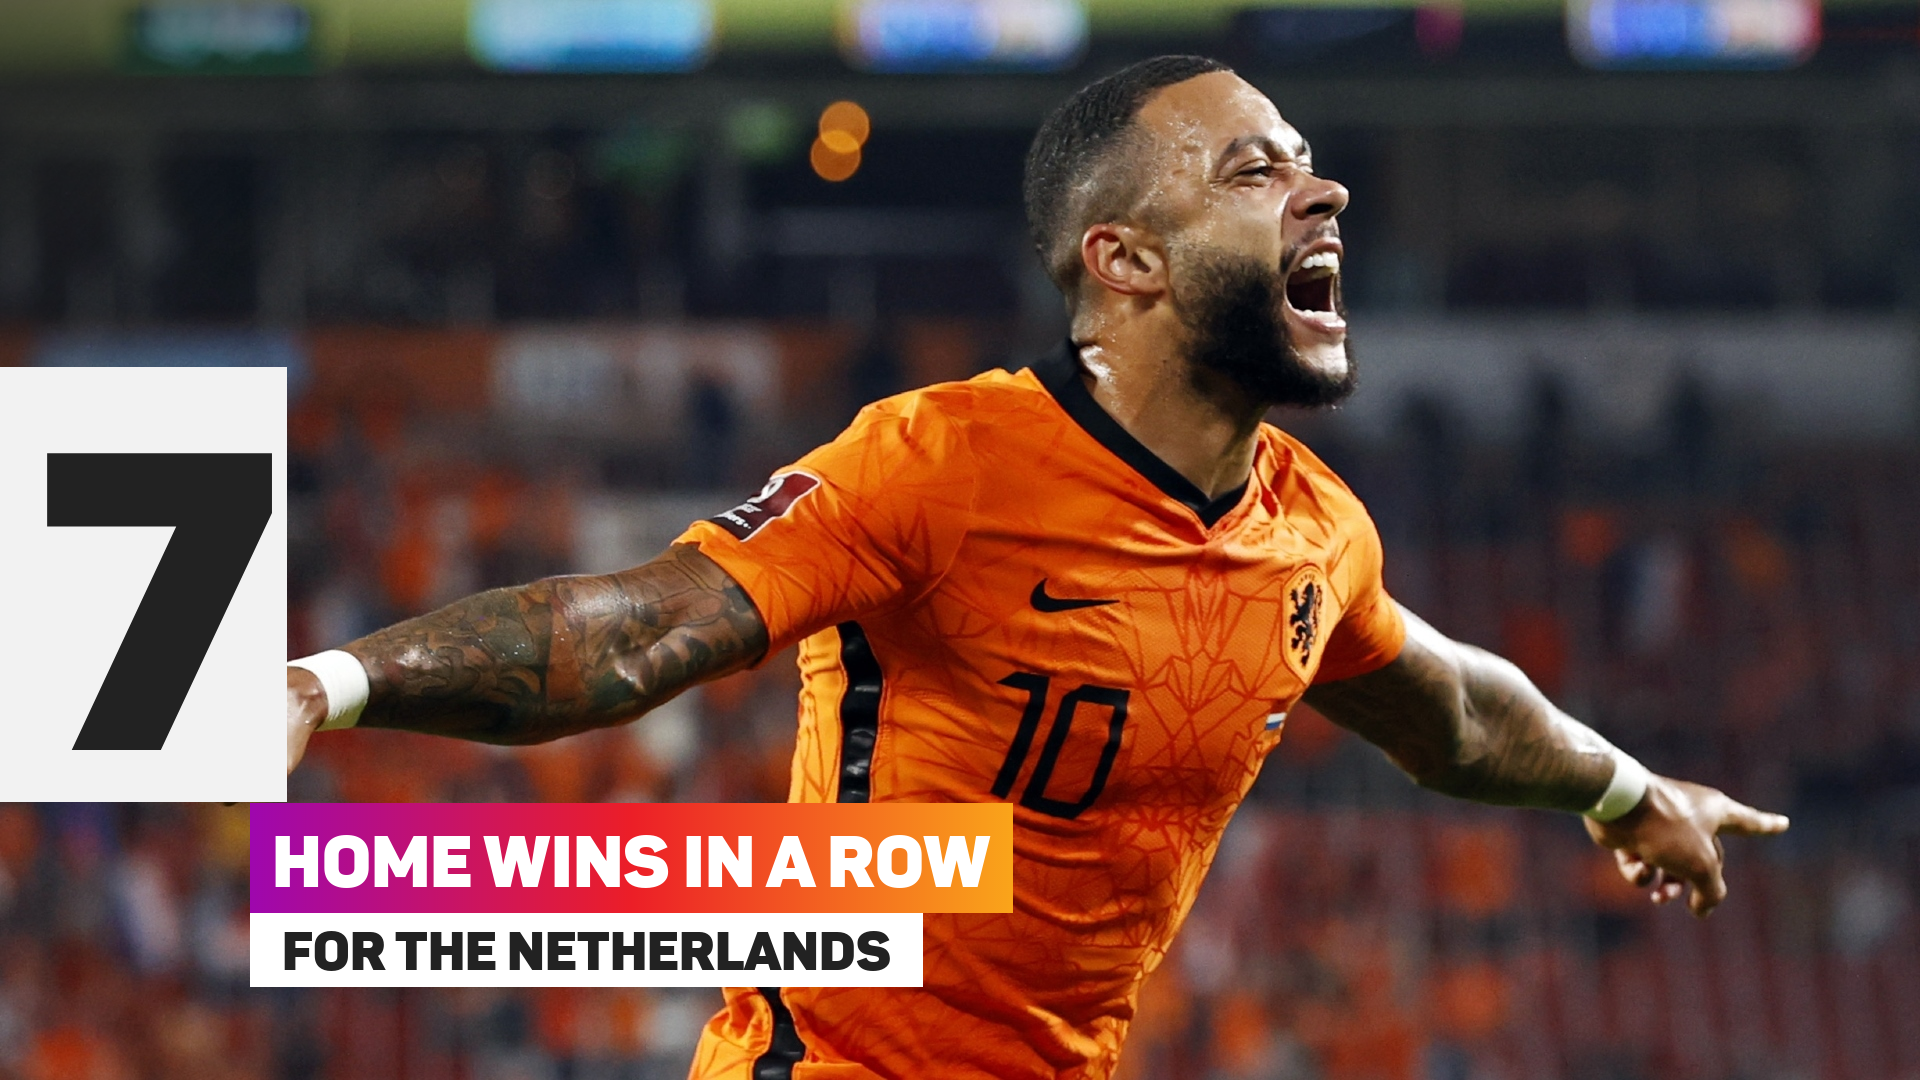 The Netherlands have won seven home games in a row